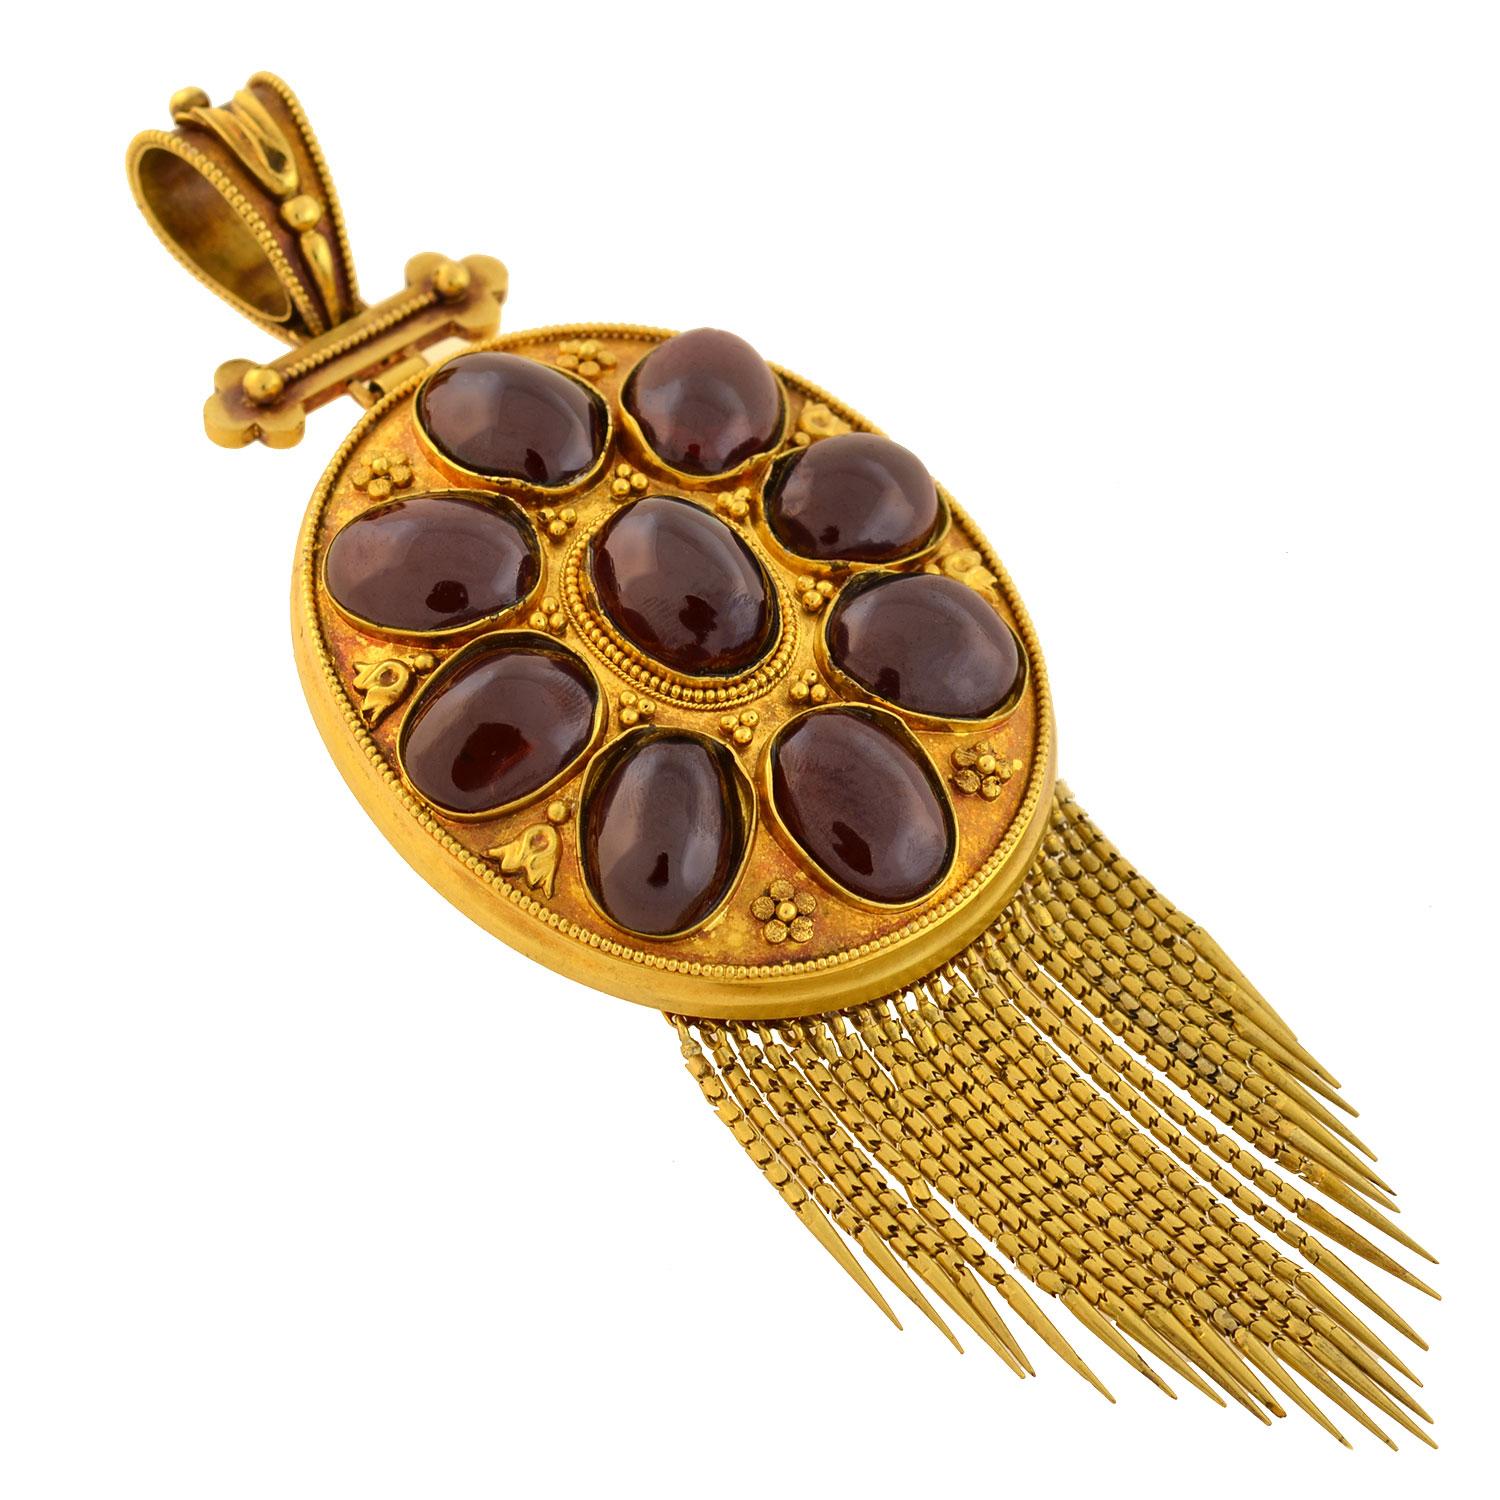 An absolutely incredible garnet locket pendant from the Victorian (ca1880) era! Crafted in vibrant 18kt yellow gold, this wonderful piece, which is particularly large in size, is detailed with several fabulous garnets surrounded by fine Etruscan